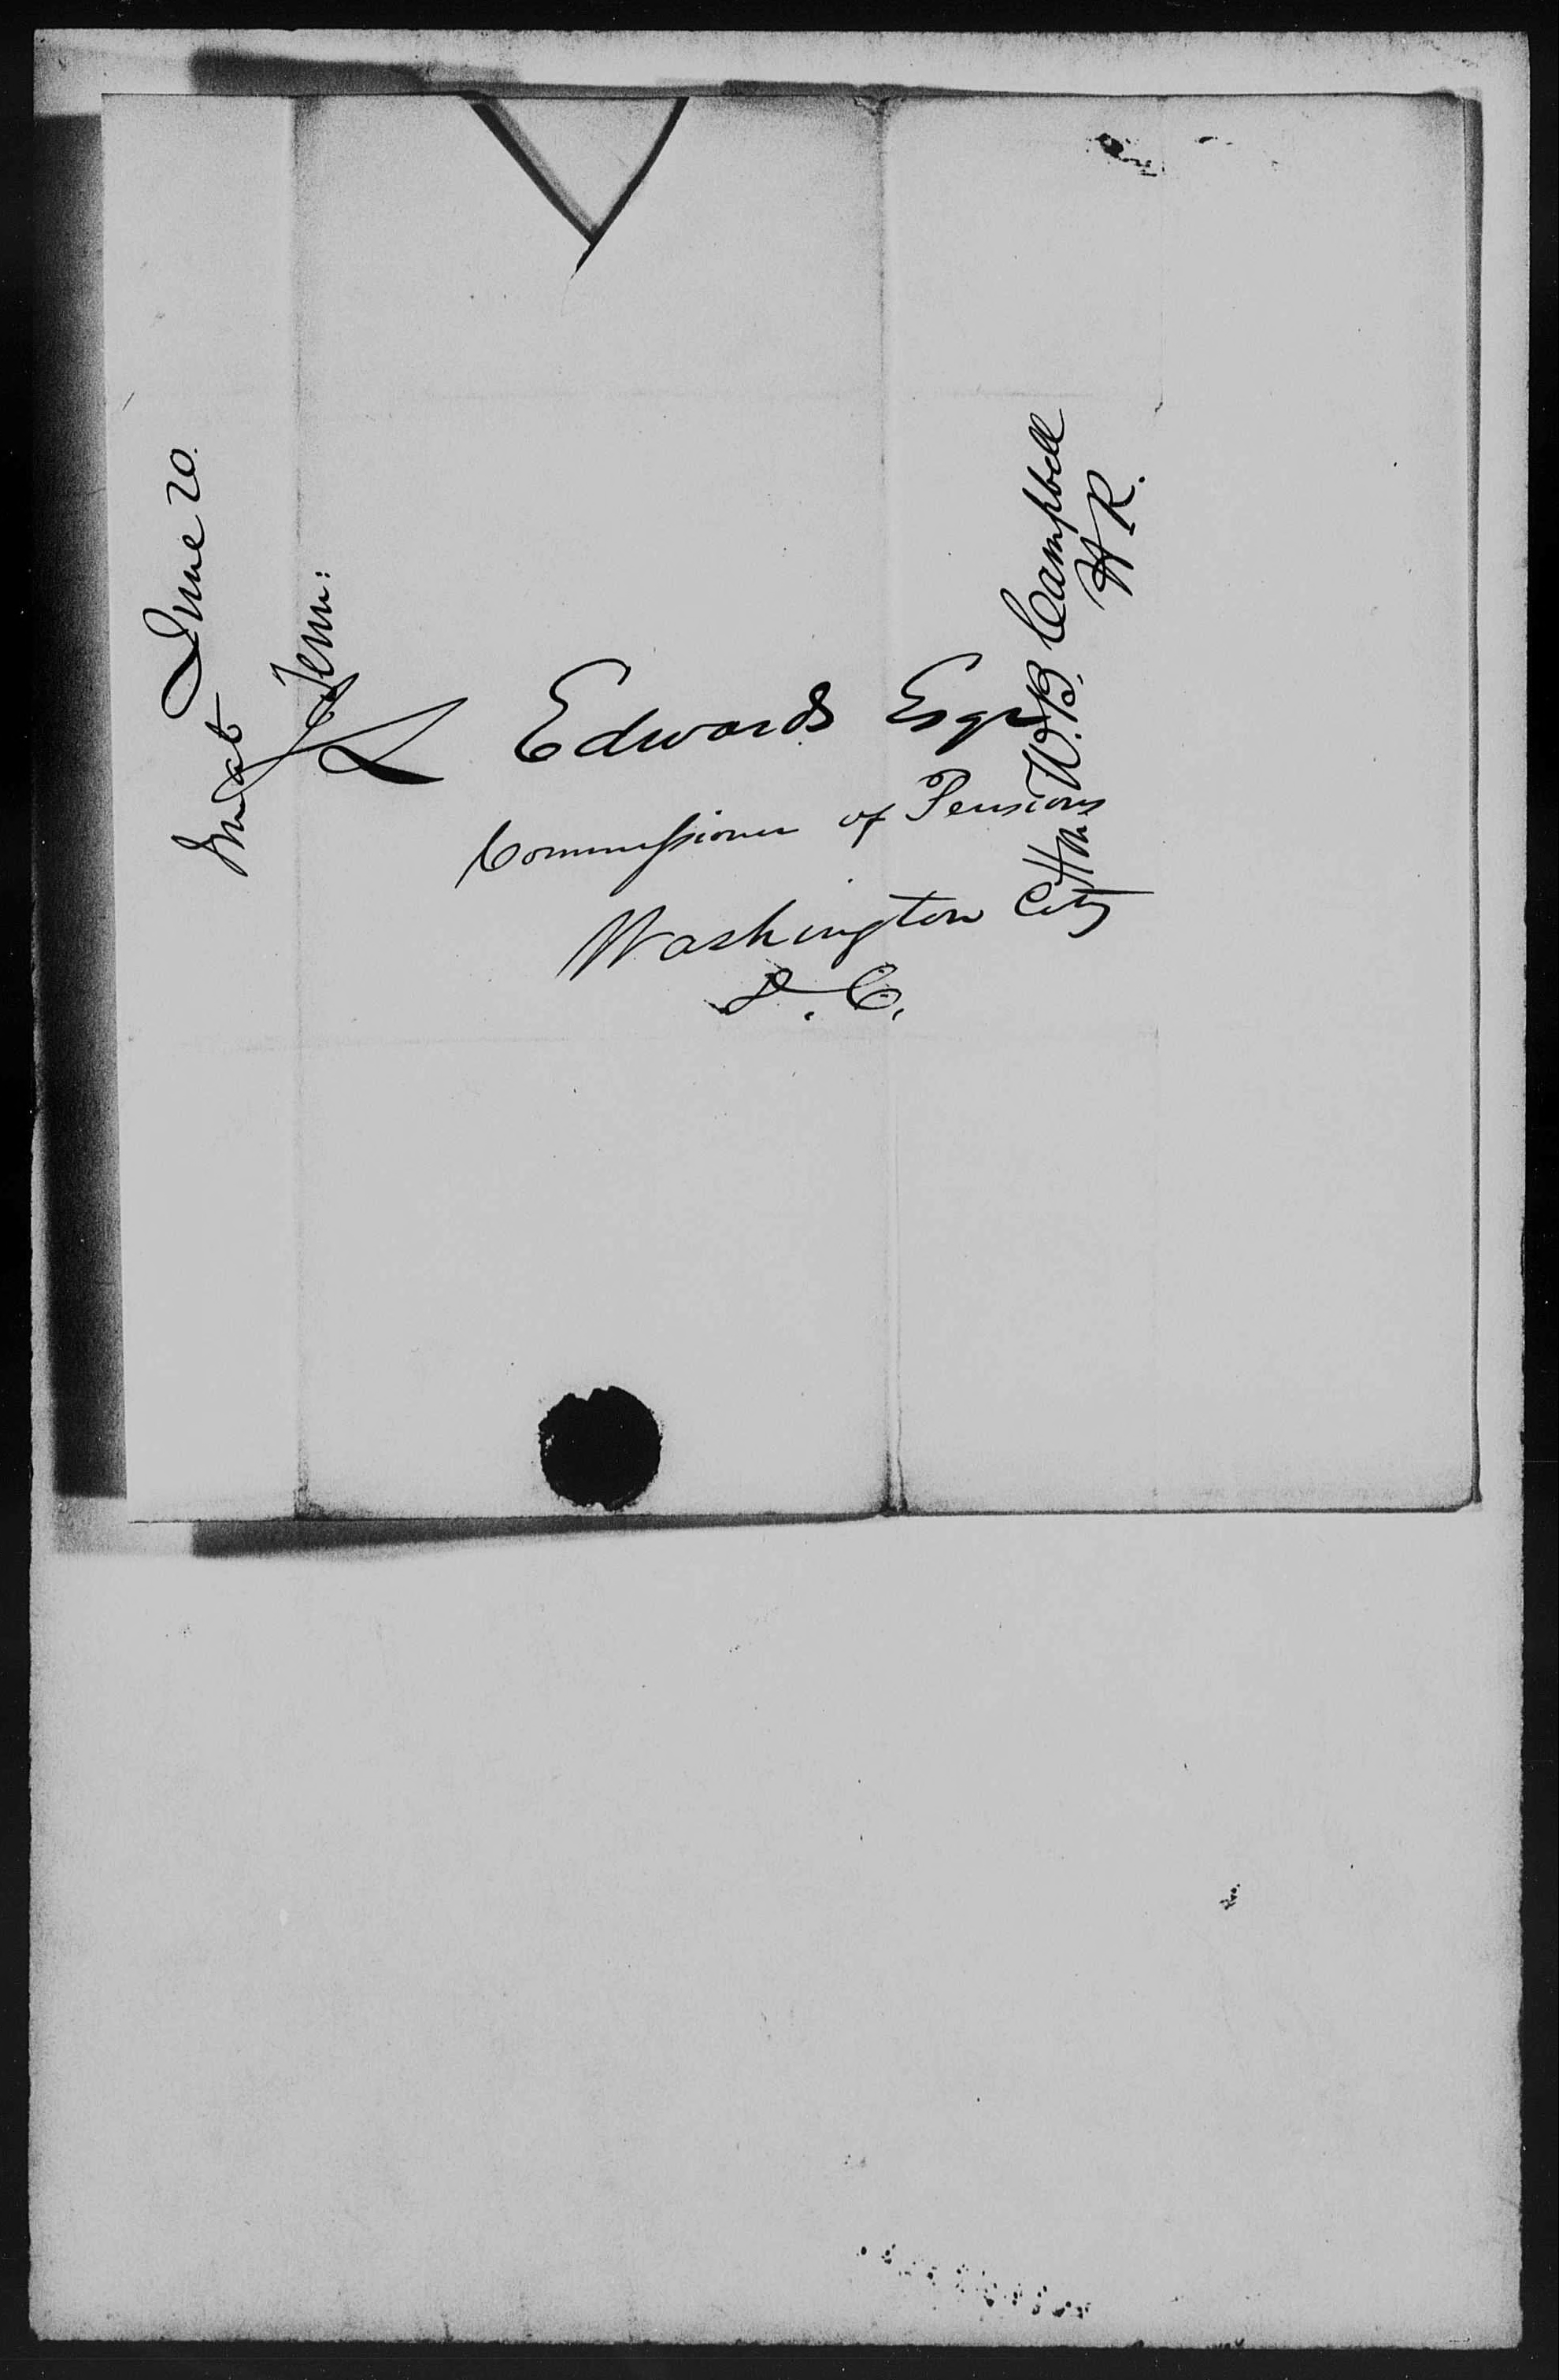 Letter from William B. Campbell to James L. Edwards, 19 June 1838, page 2